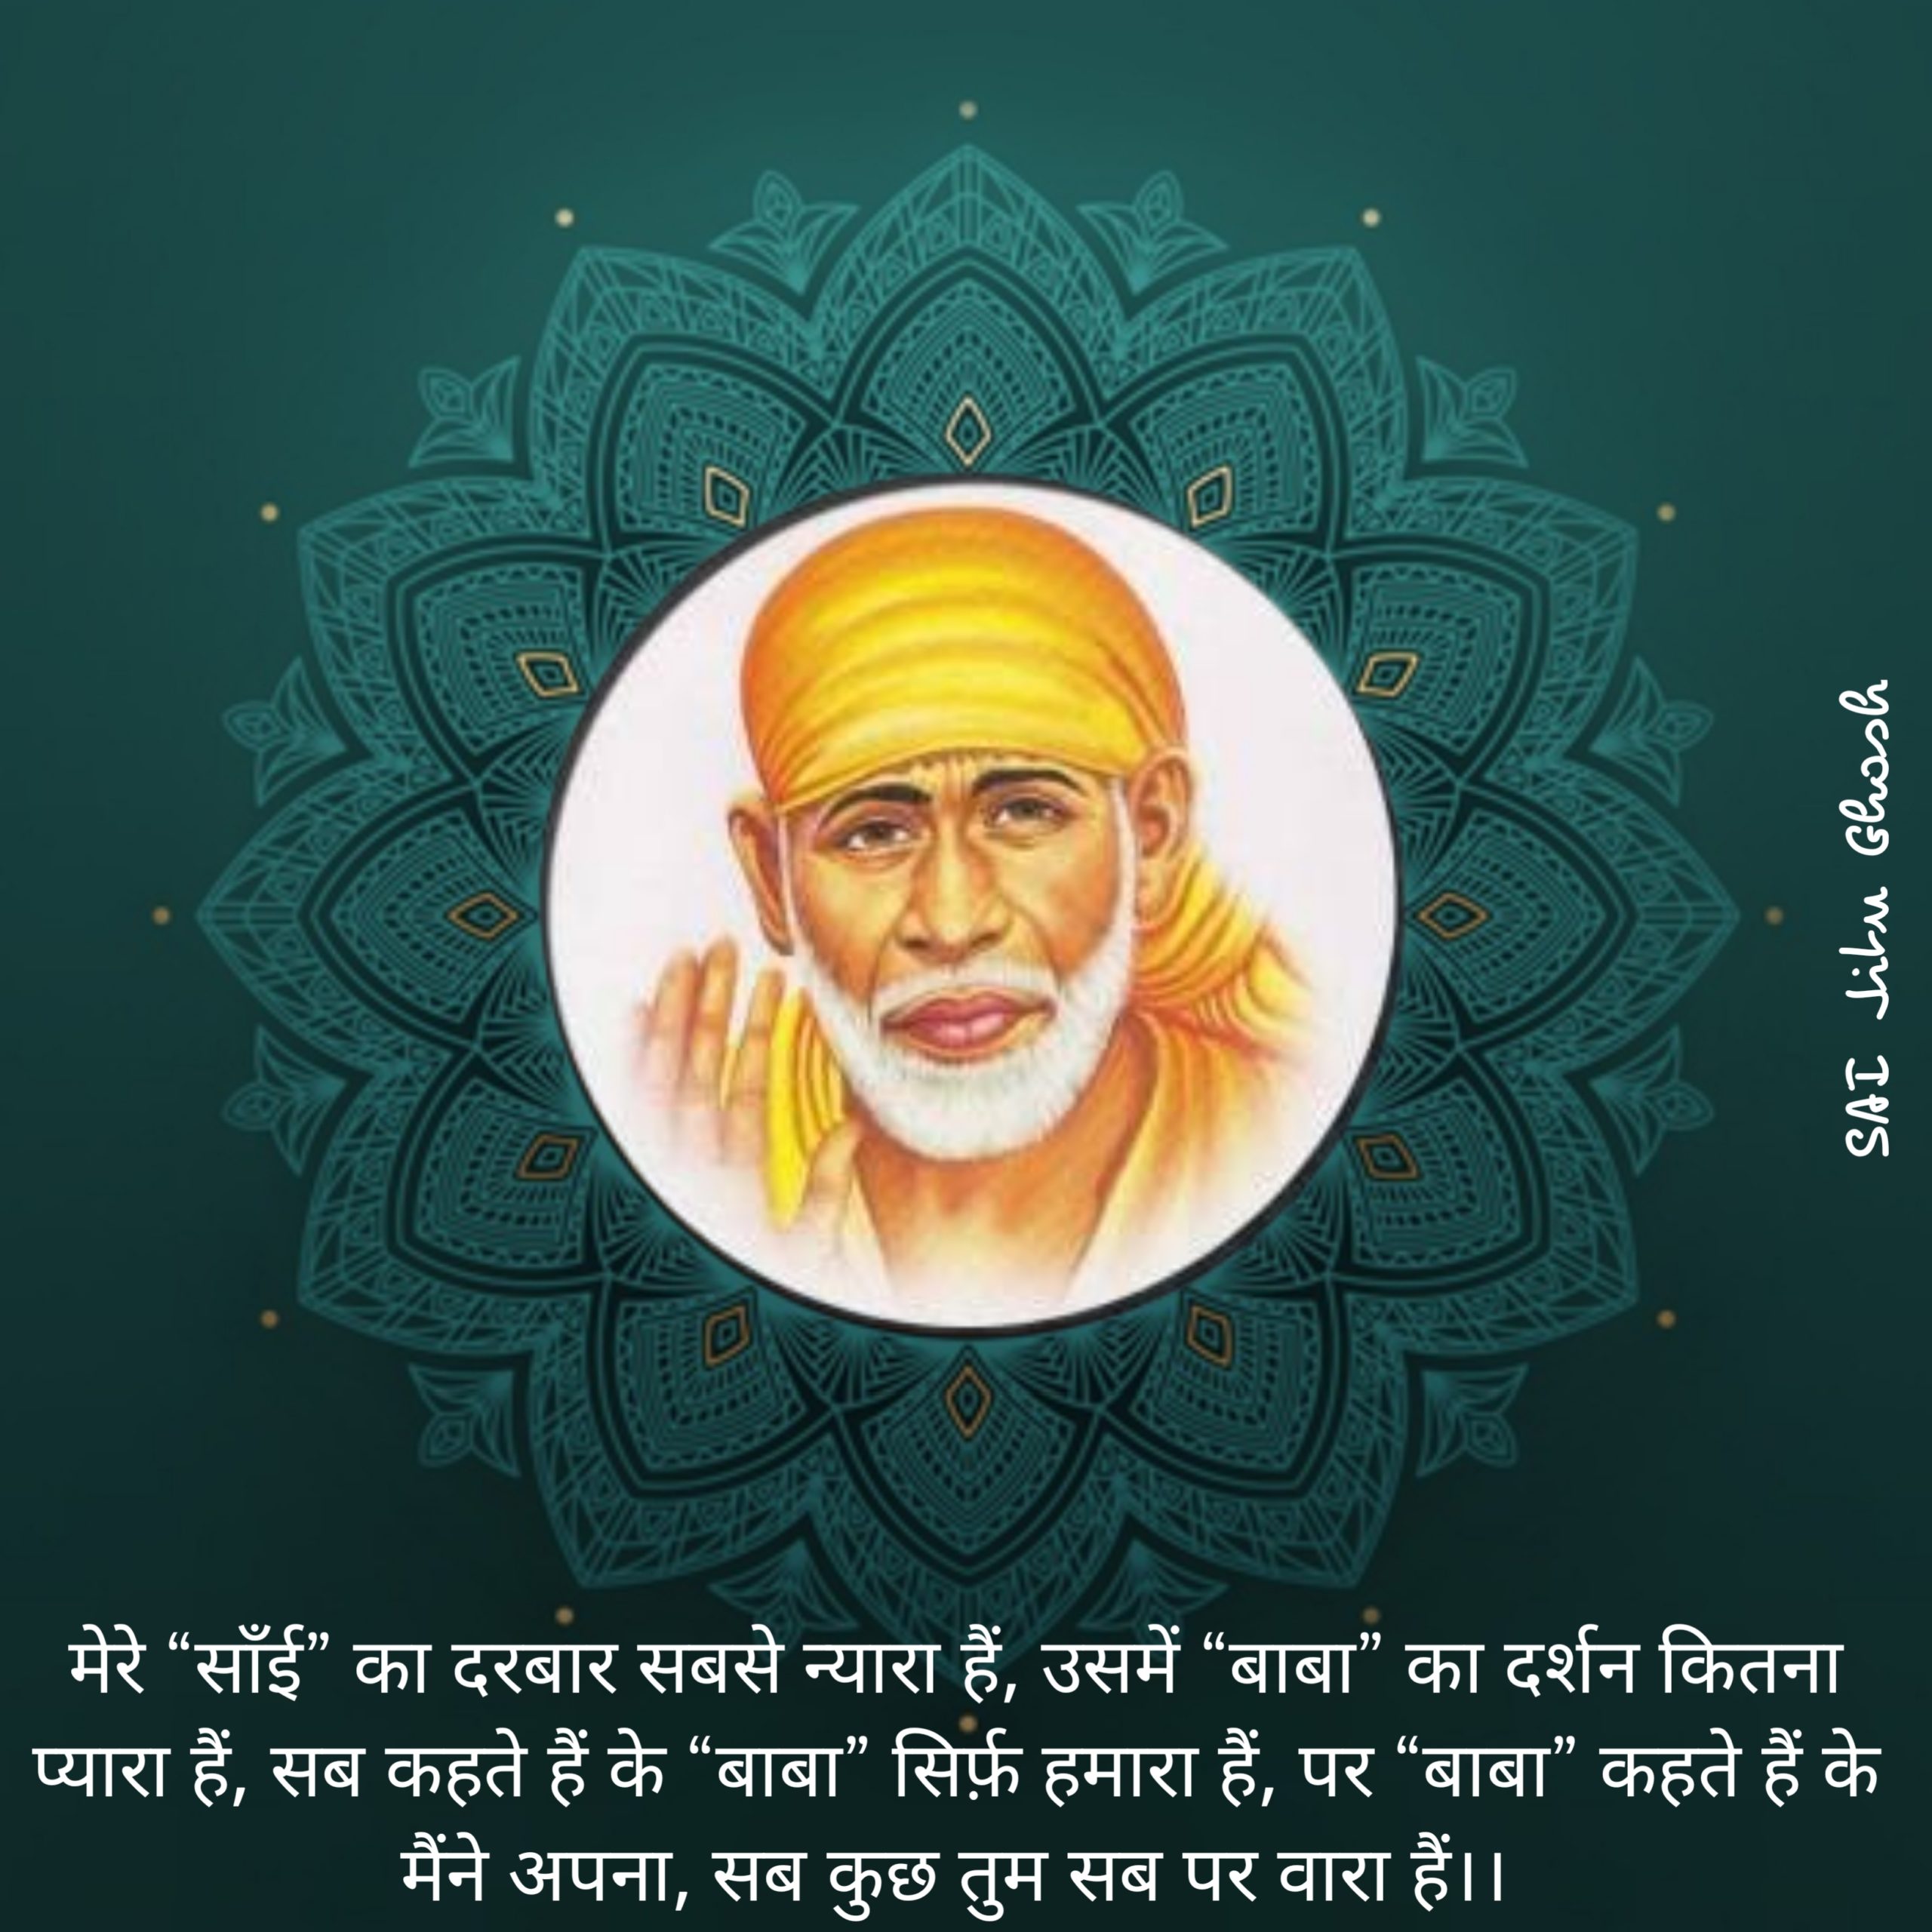 50+ Best Sai Baba Painting Ideas Quotes In 2022 - Pinterest